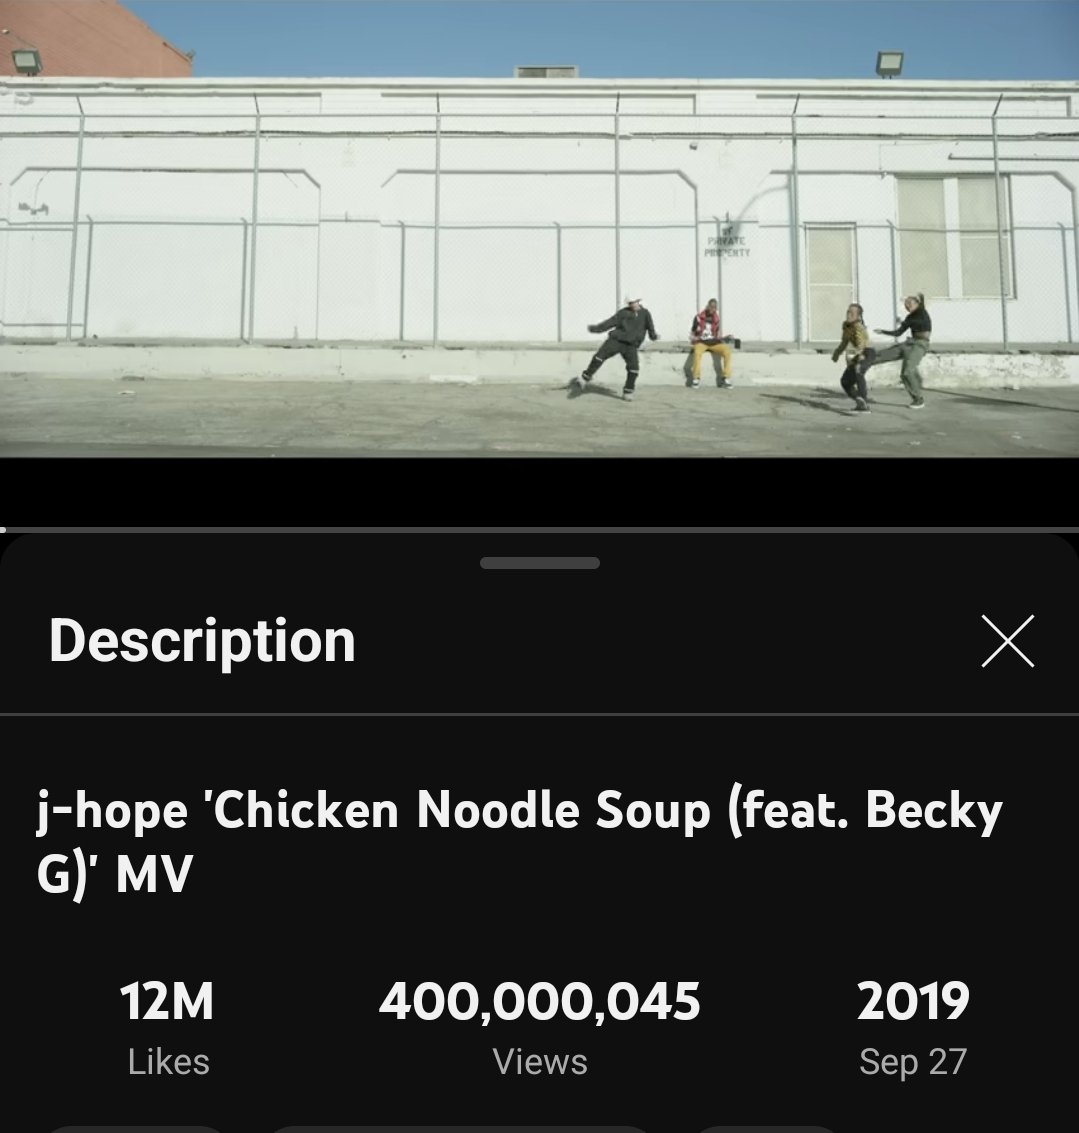 Chicken Noodle Soup has surpassed 400 Million views on YouTube.